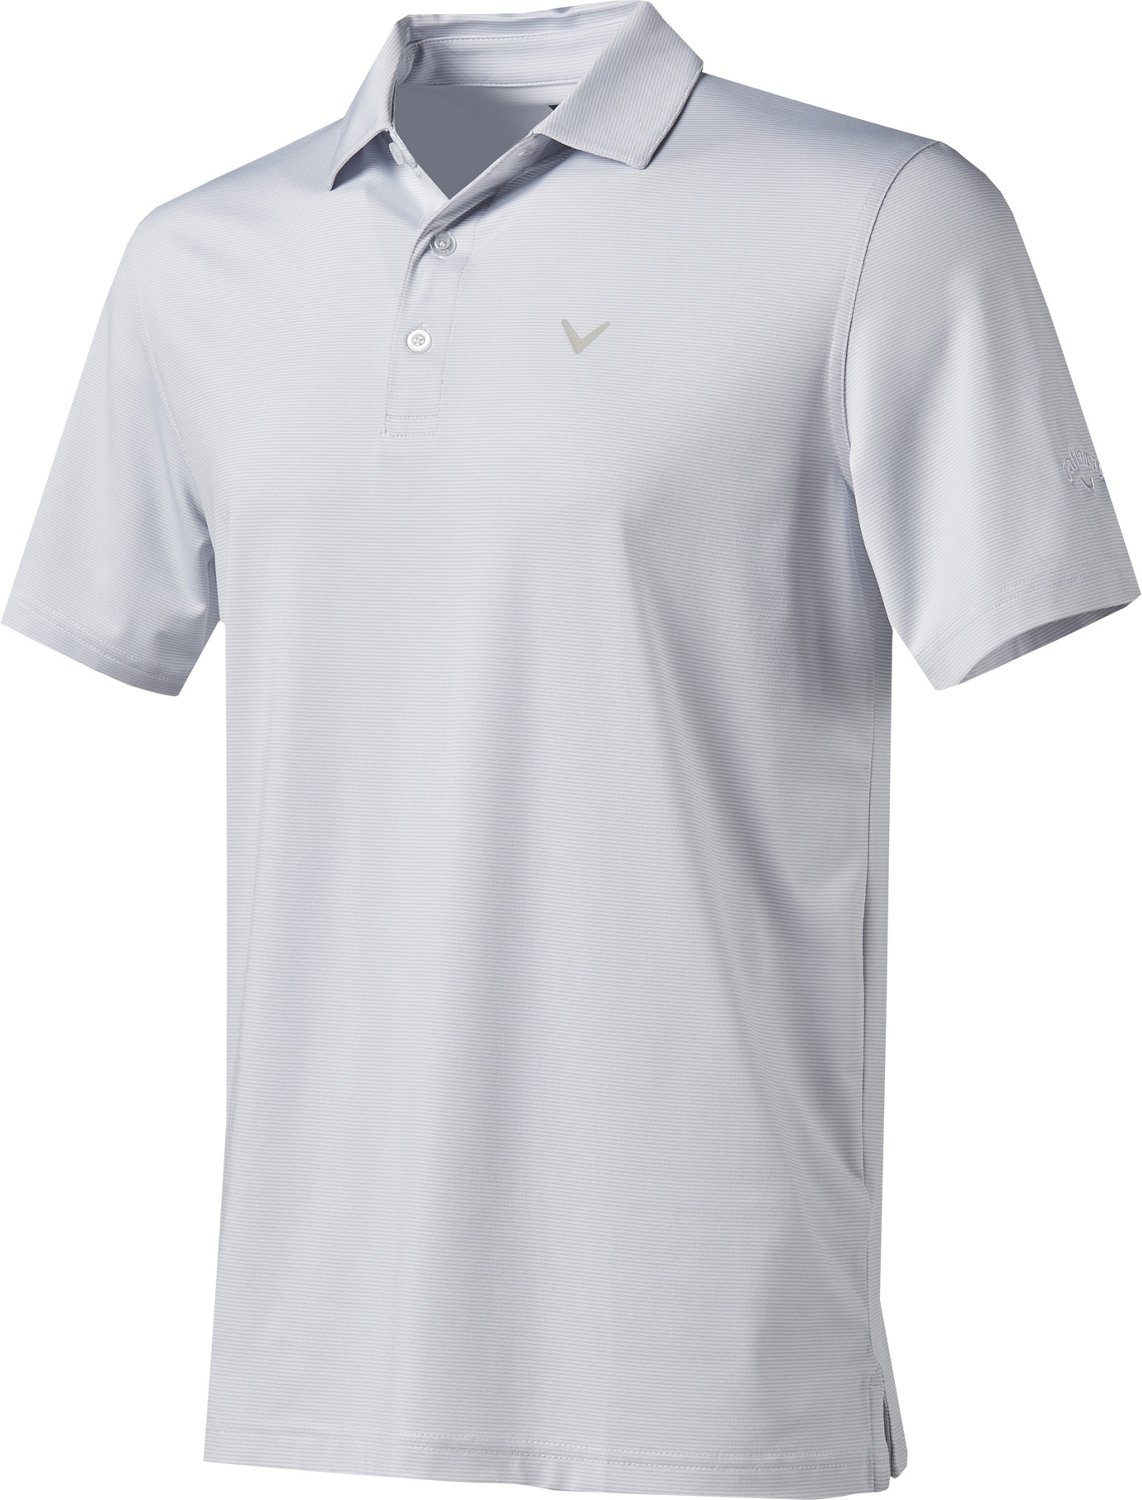 Callaway Men's Pro Spin Fine Line Stripe Golf Polo Shirt                                                                         - view number 1 selected